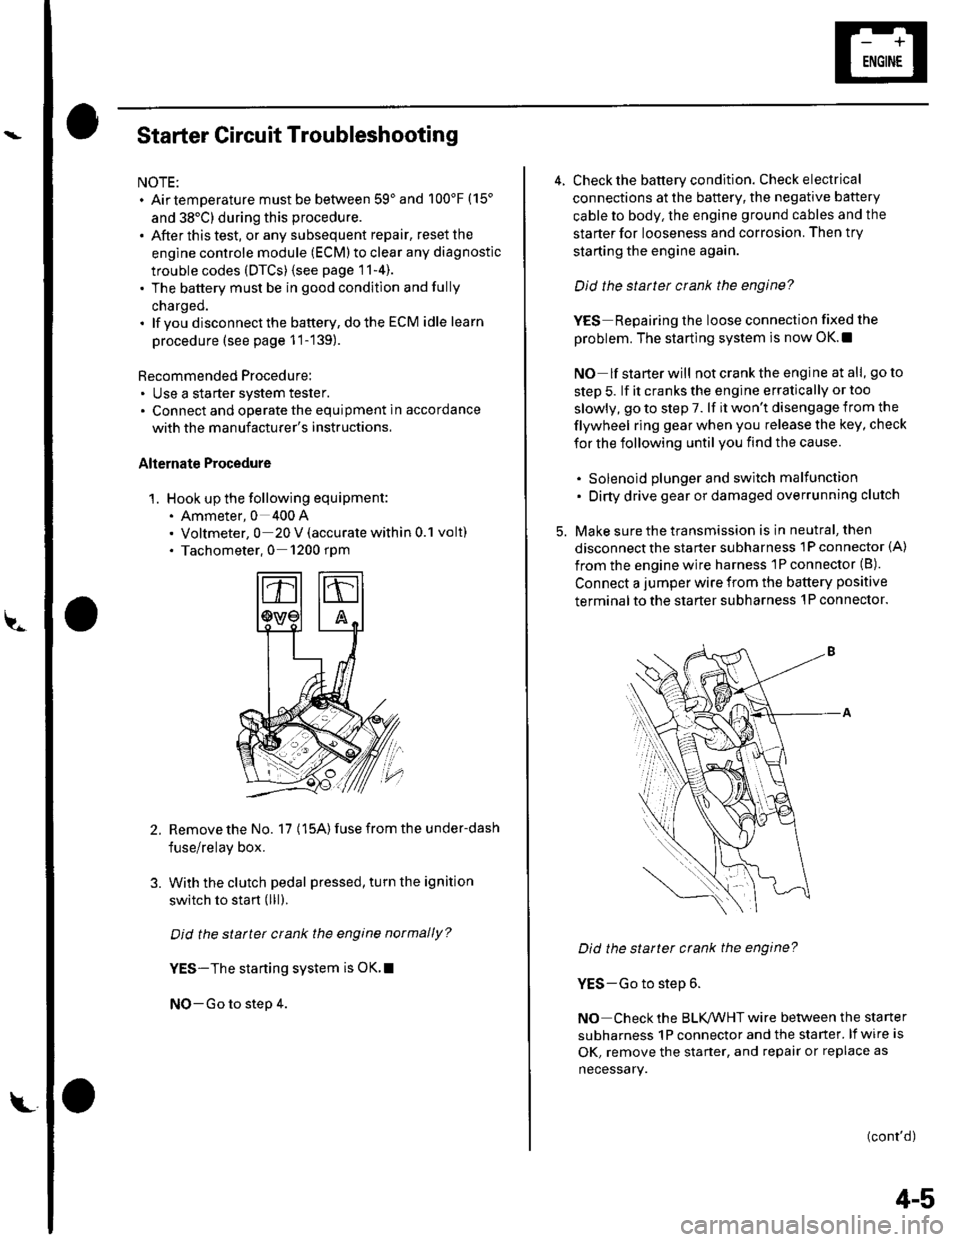 HONDA CIVIC 2002 7.G Workshop Manual Starter Circuit Troubleshooting
NOTE:. Airtemperature must be between 59and 100F (15
and 38C) during this procedure.
. After this test, or any subsequent repair, reset the
engine controle module (